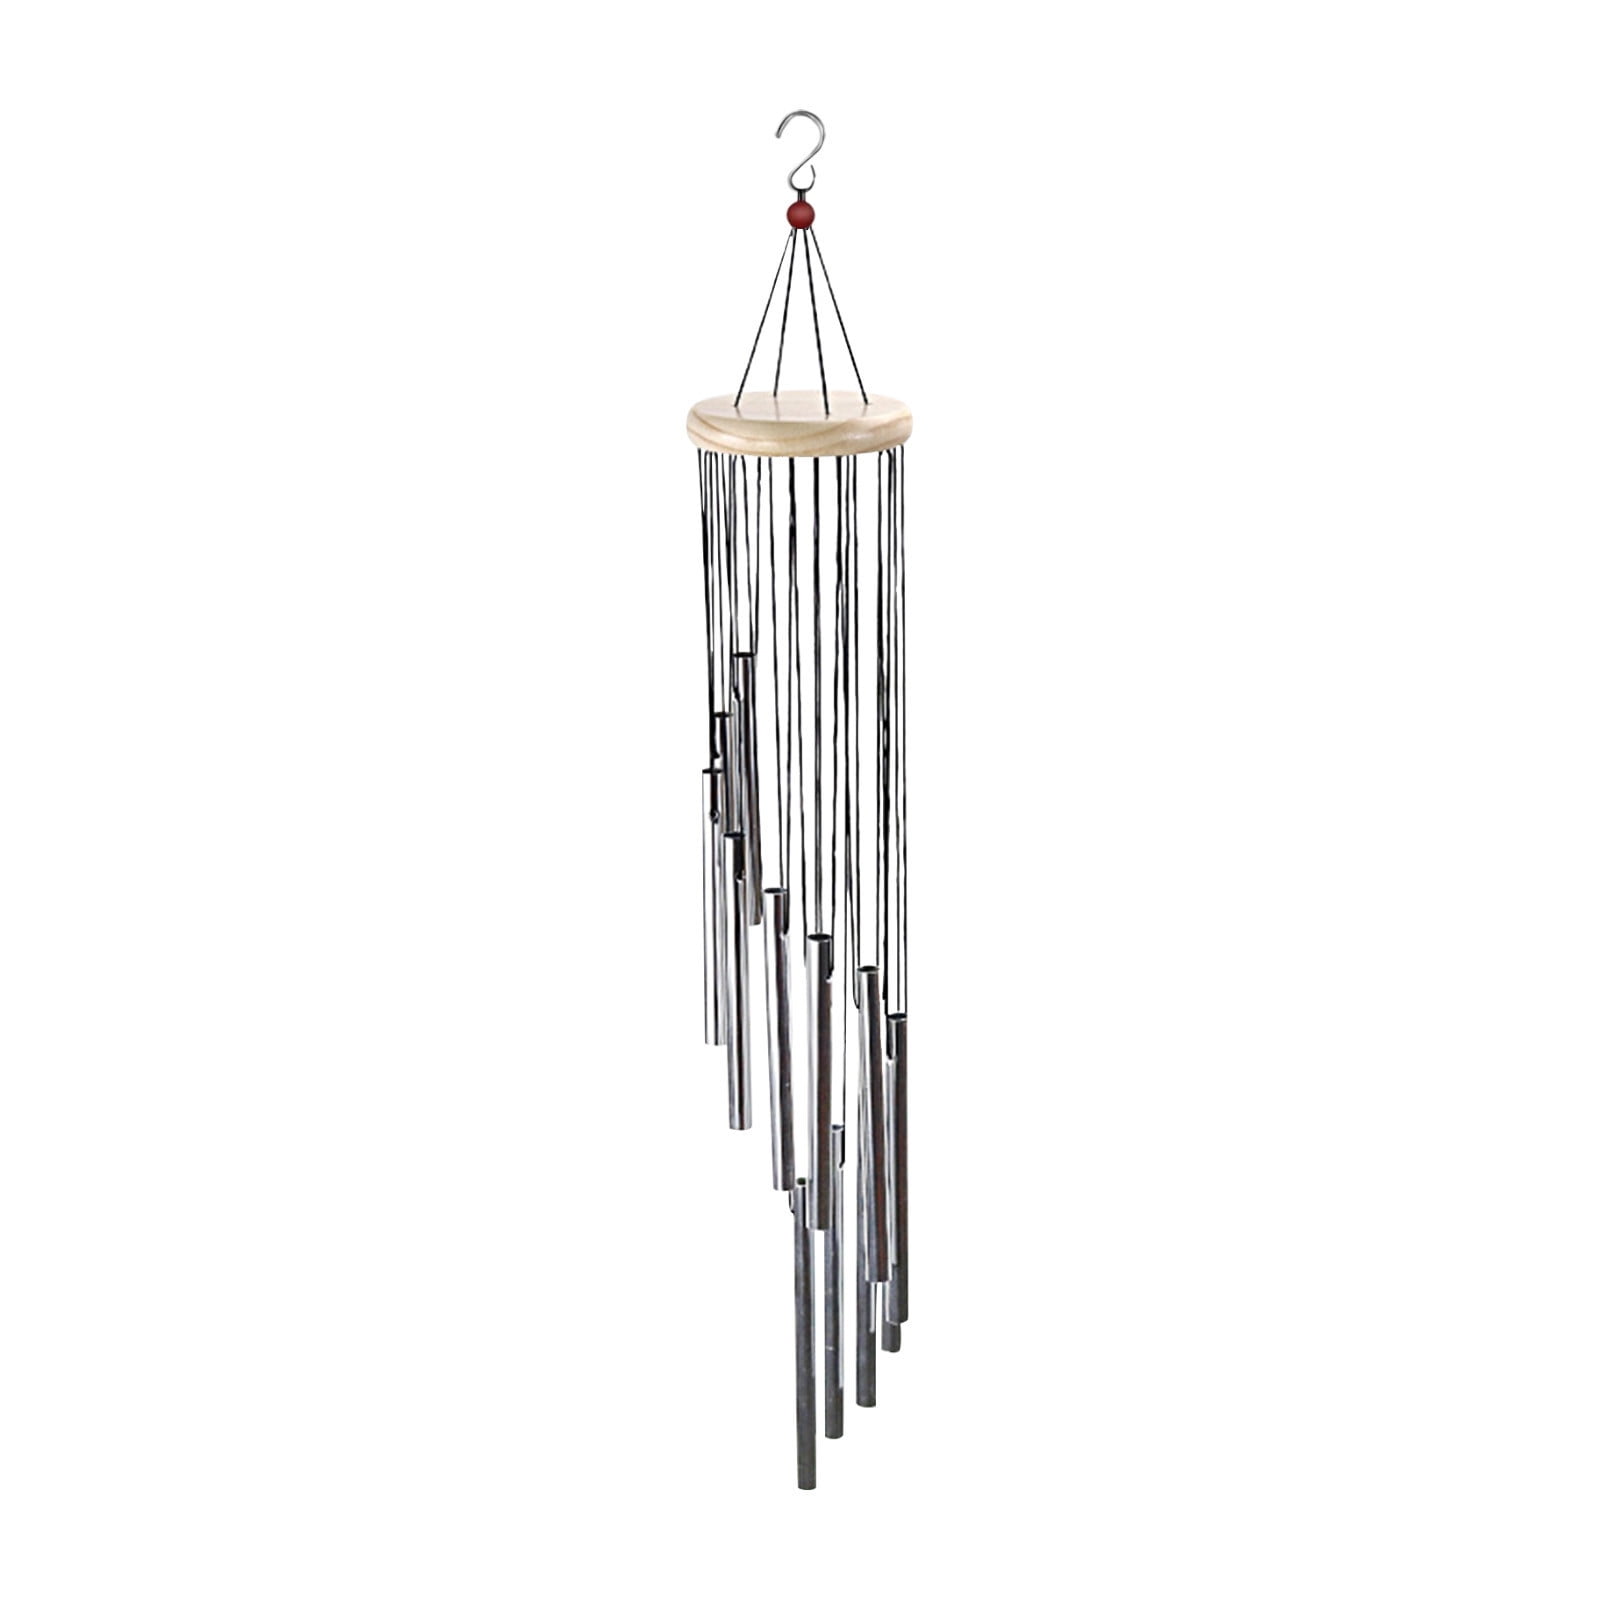 Creative Wood Metal Multi-tube Wind Chime Car Interior With